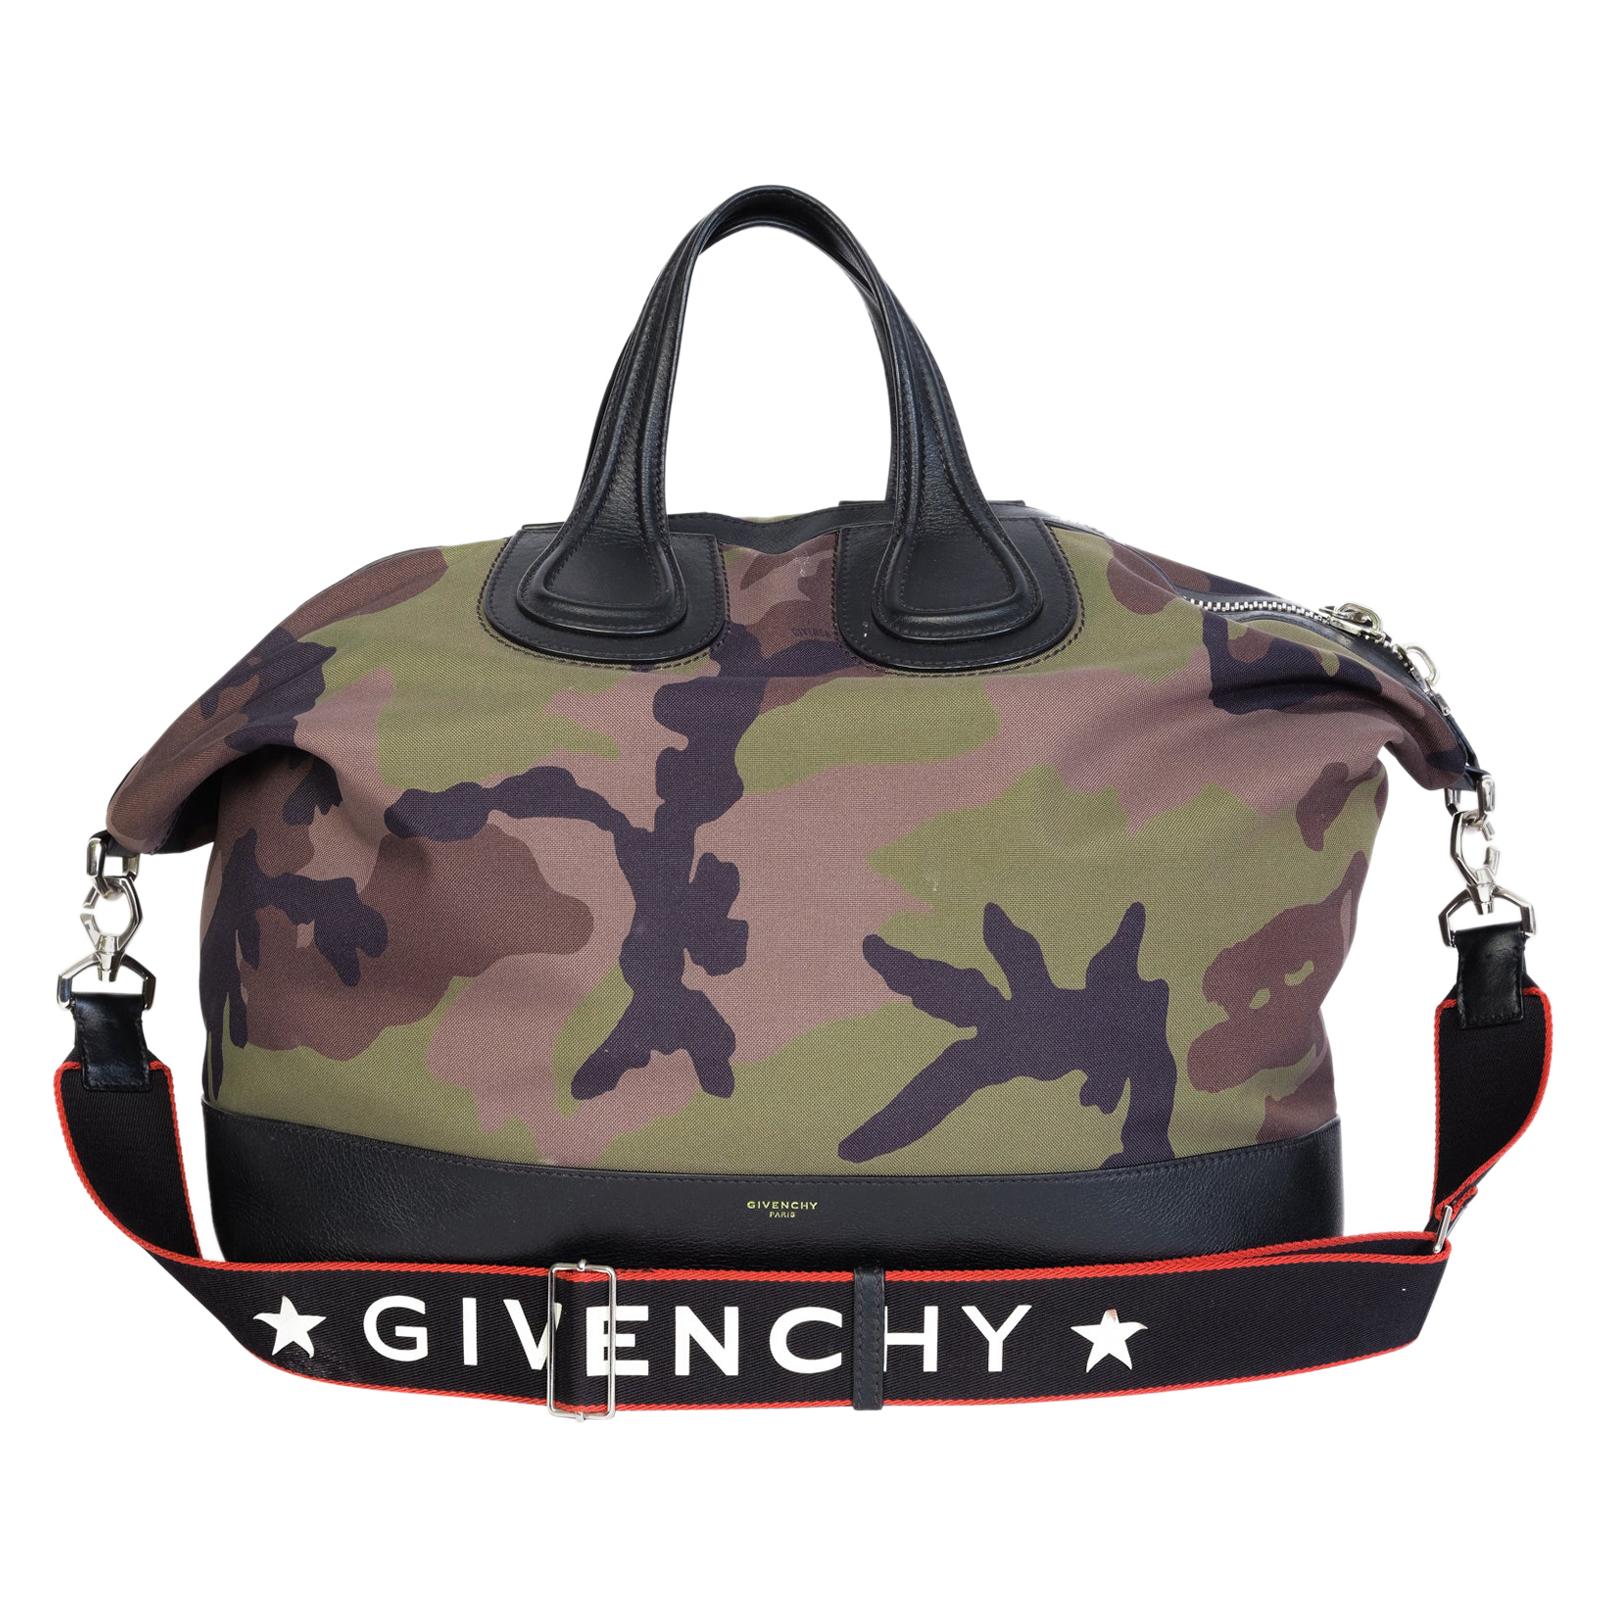 Camo Nightengale Duffle Bag von Givenchy